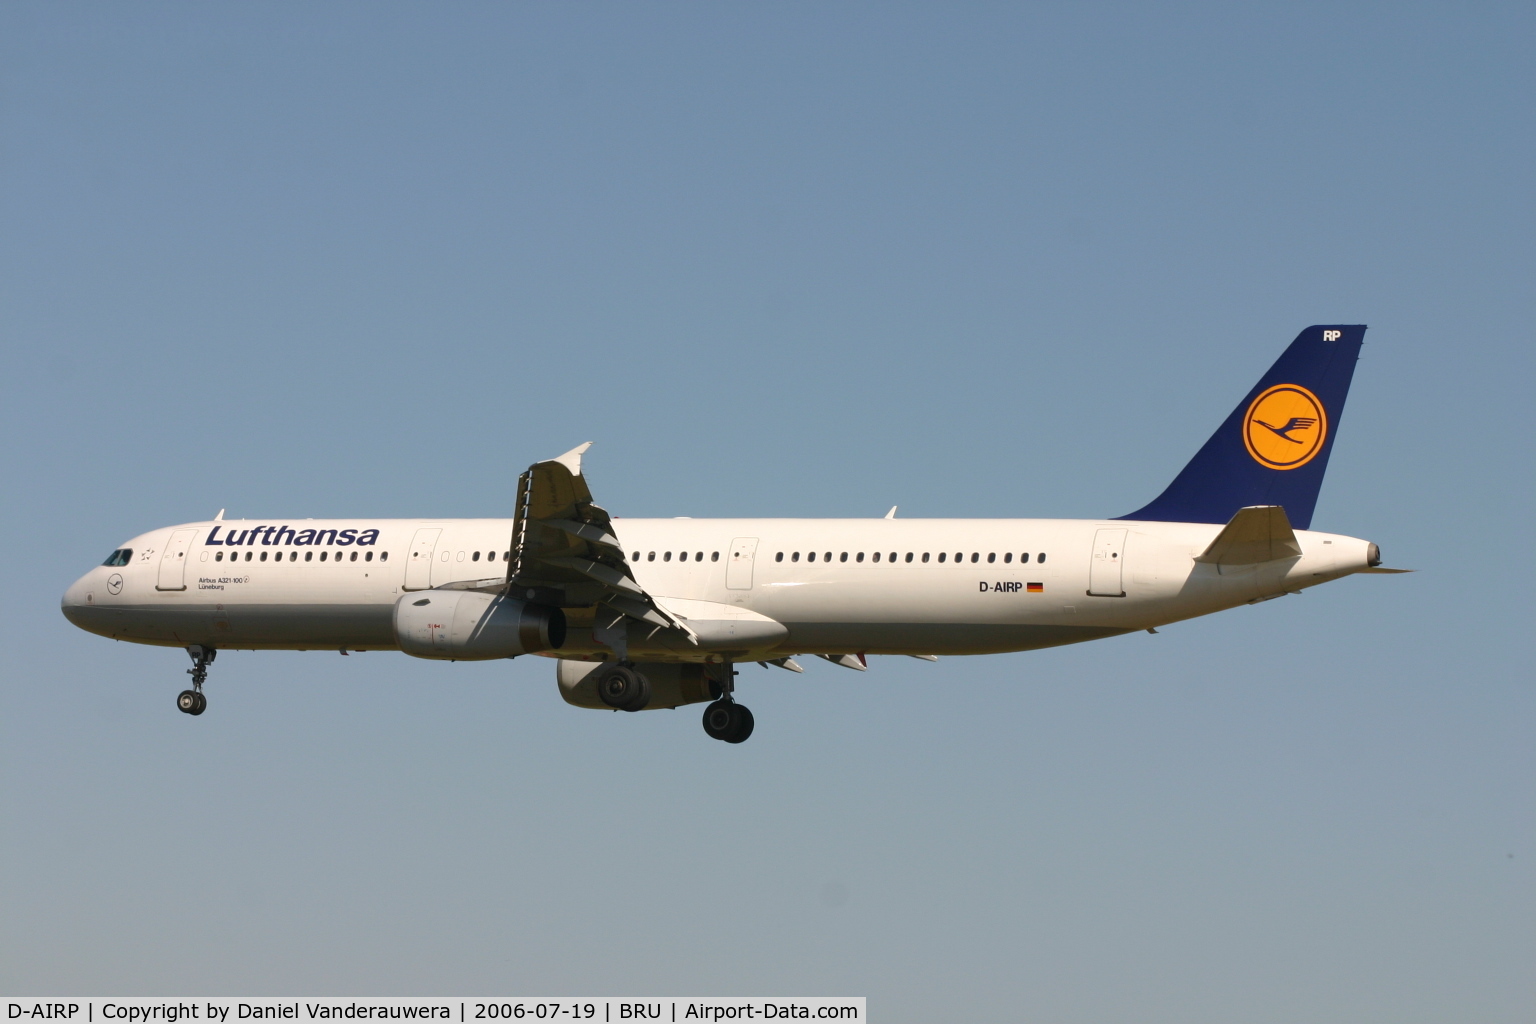 D-AIRP, 1995 Airbus A321-131 C/N 0564, arrival of LÜNEBURG on rwy 25L